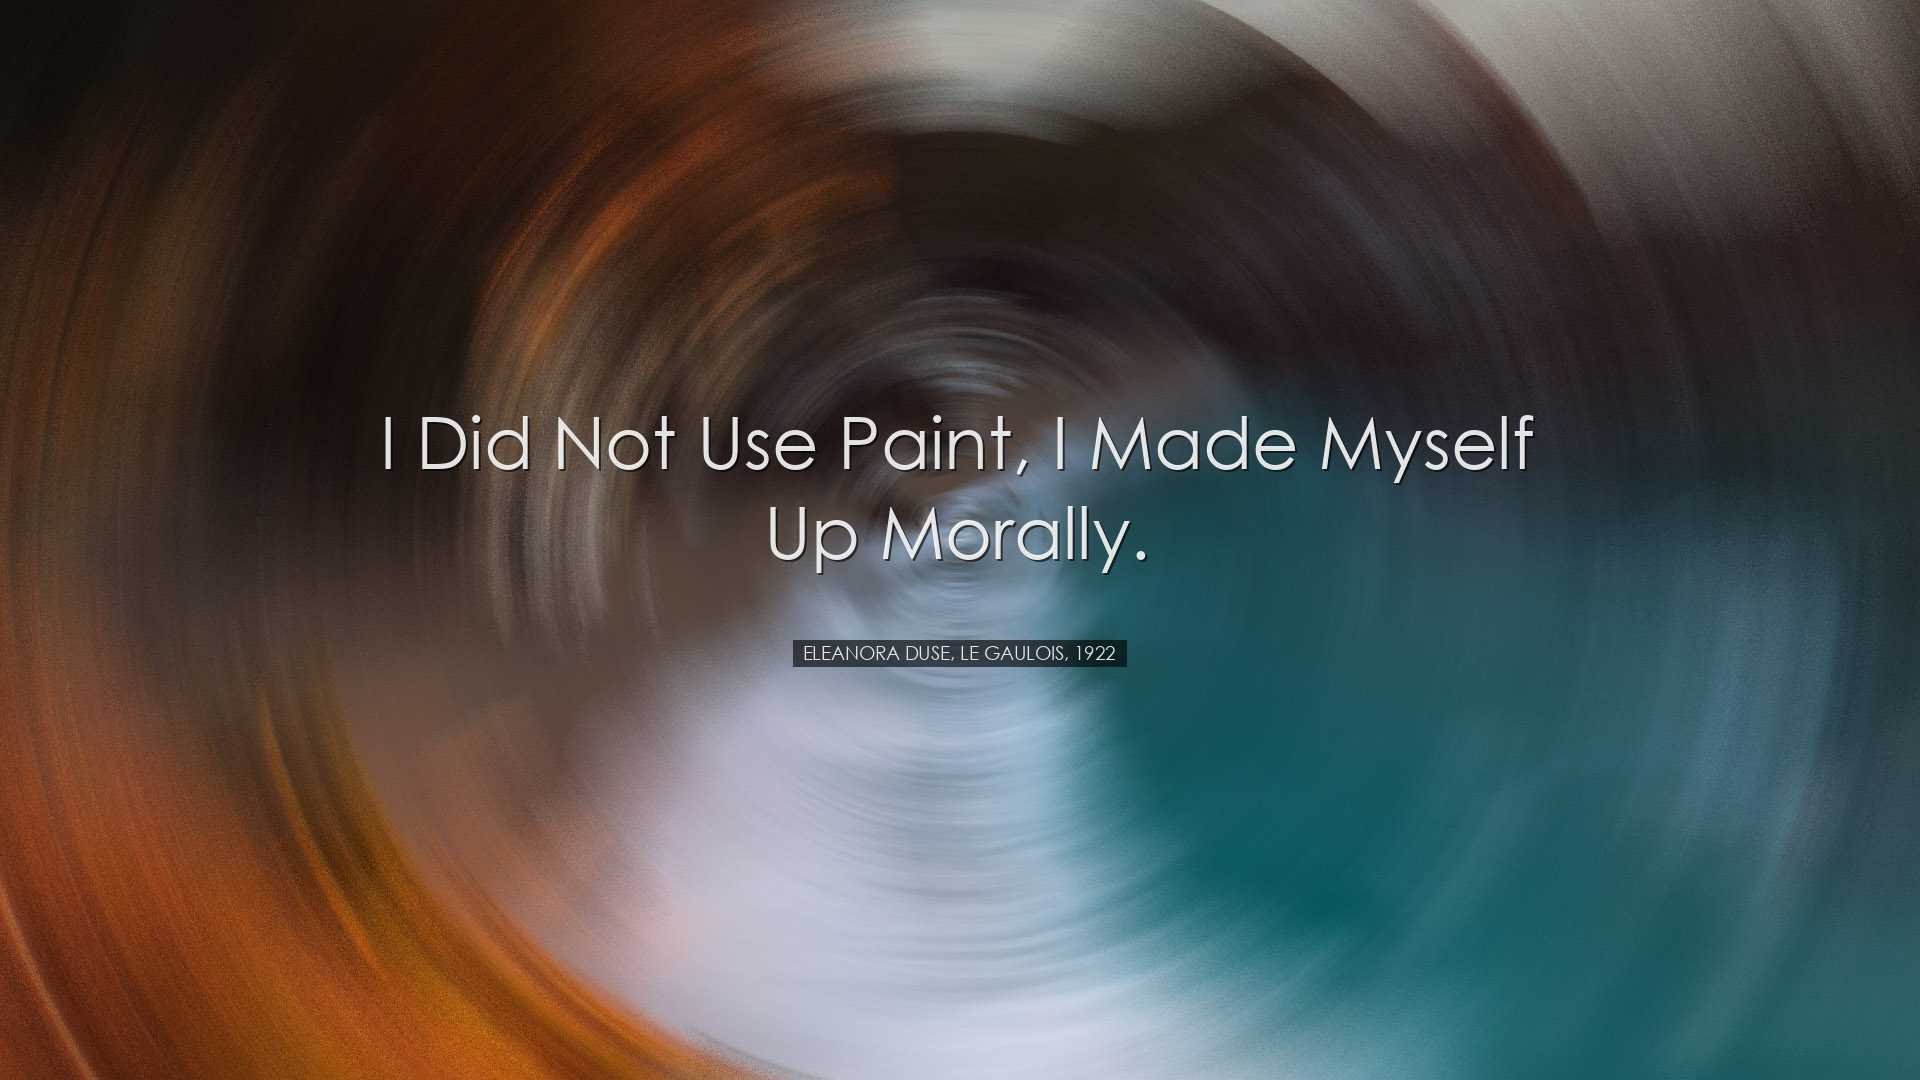 I did not use paint, I made myself up morally. - Eleanora Duse, Le